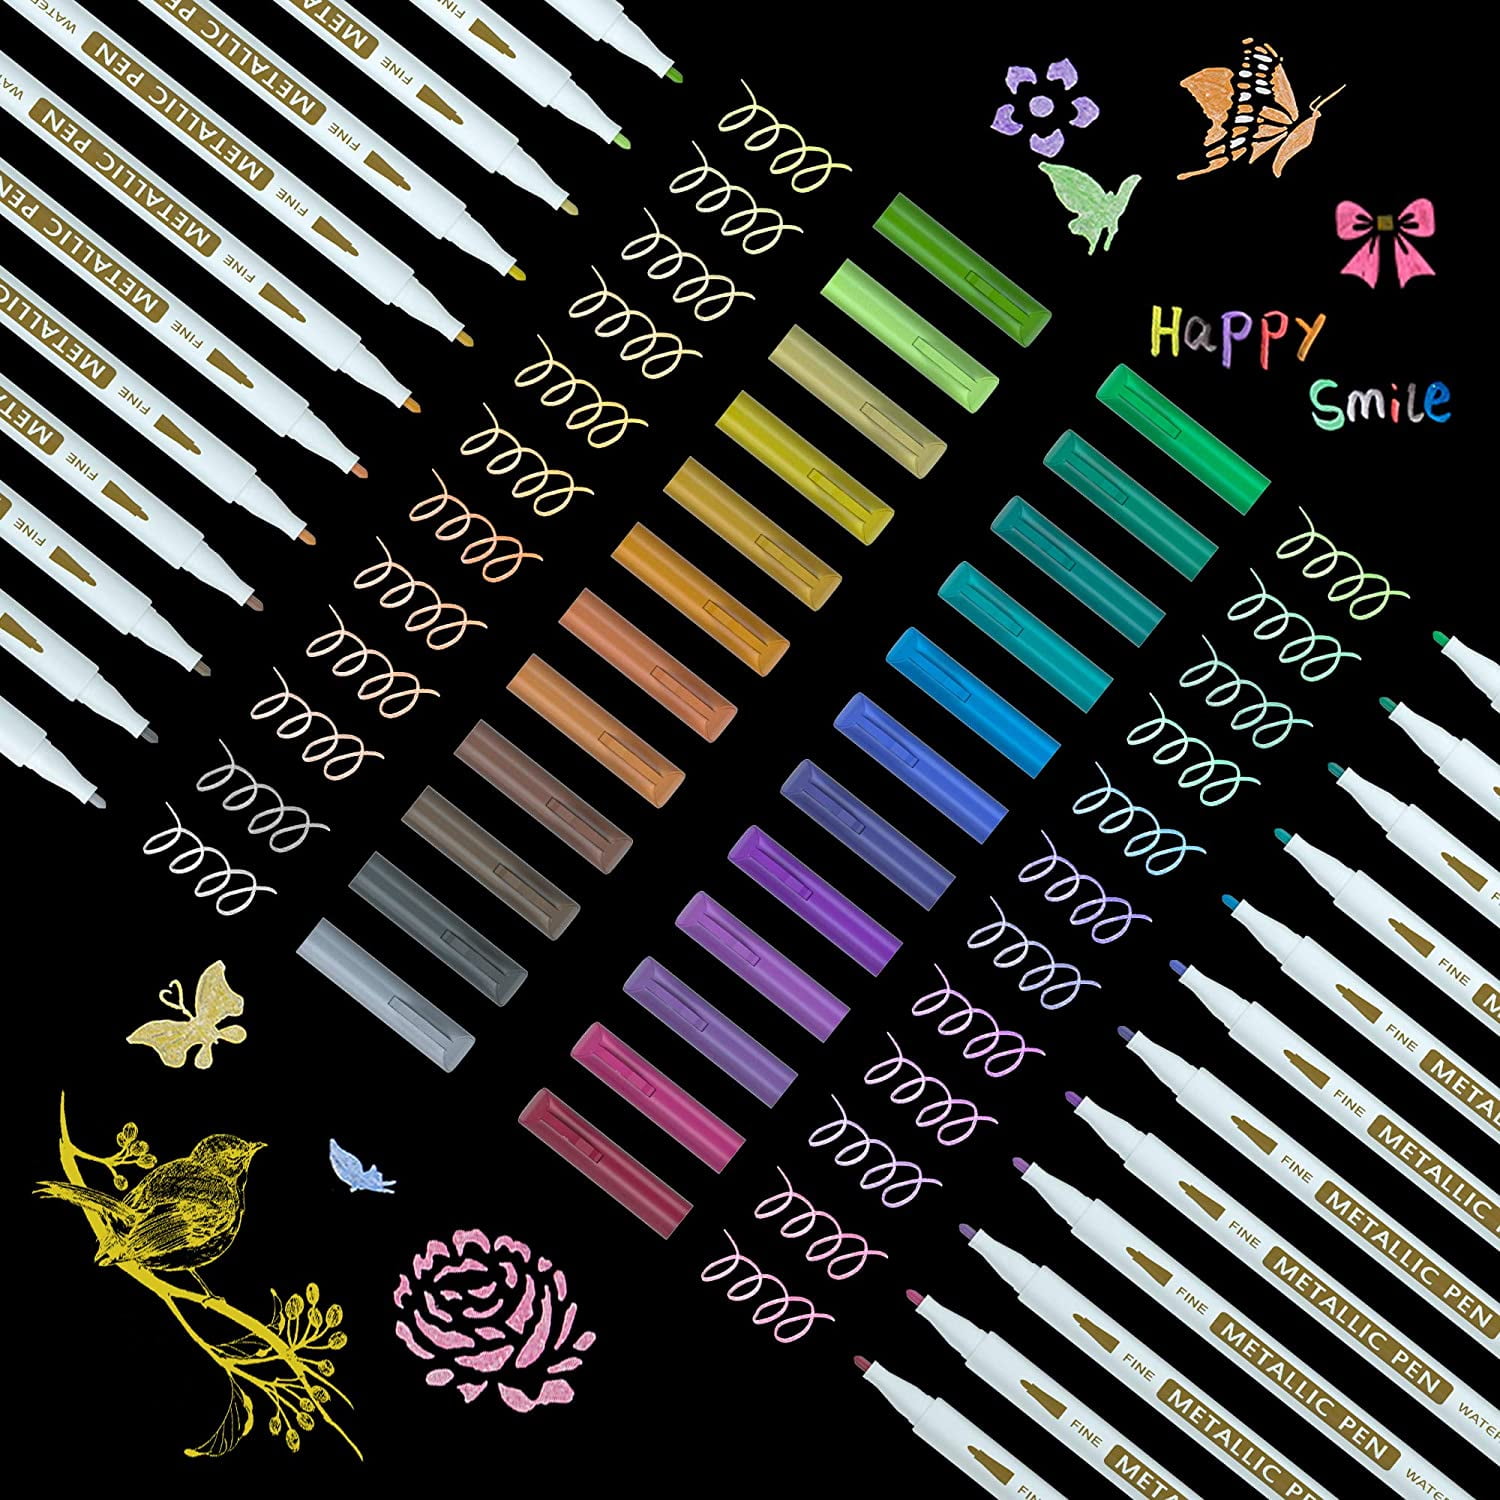 Shuttle Art Metallic Marker Pens, 24 Colors Metallic Paint Markers Fine Point for DIY Card, Calligraphy, Art and Crafting Projects, Works Great on